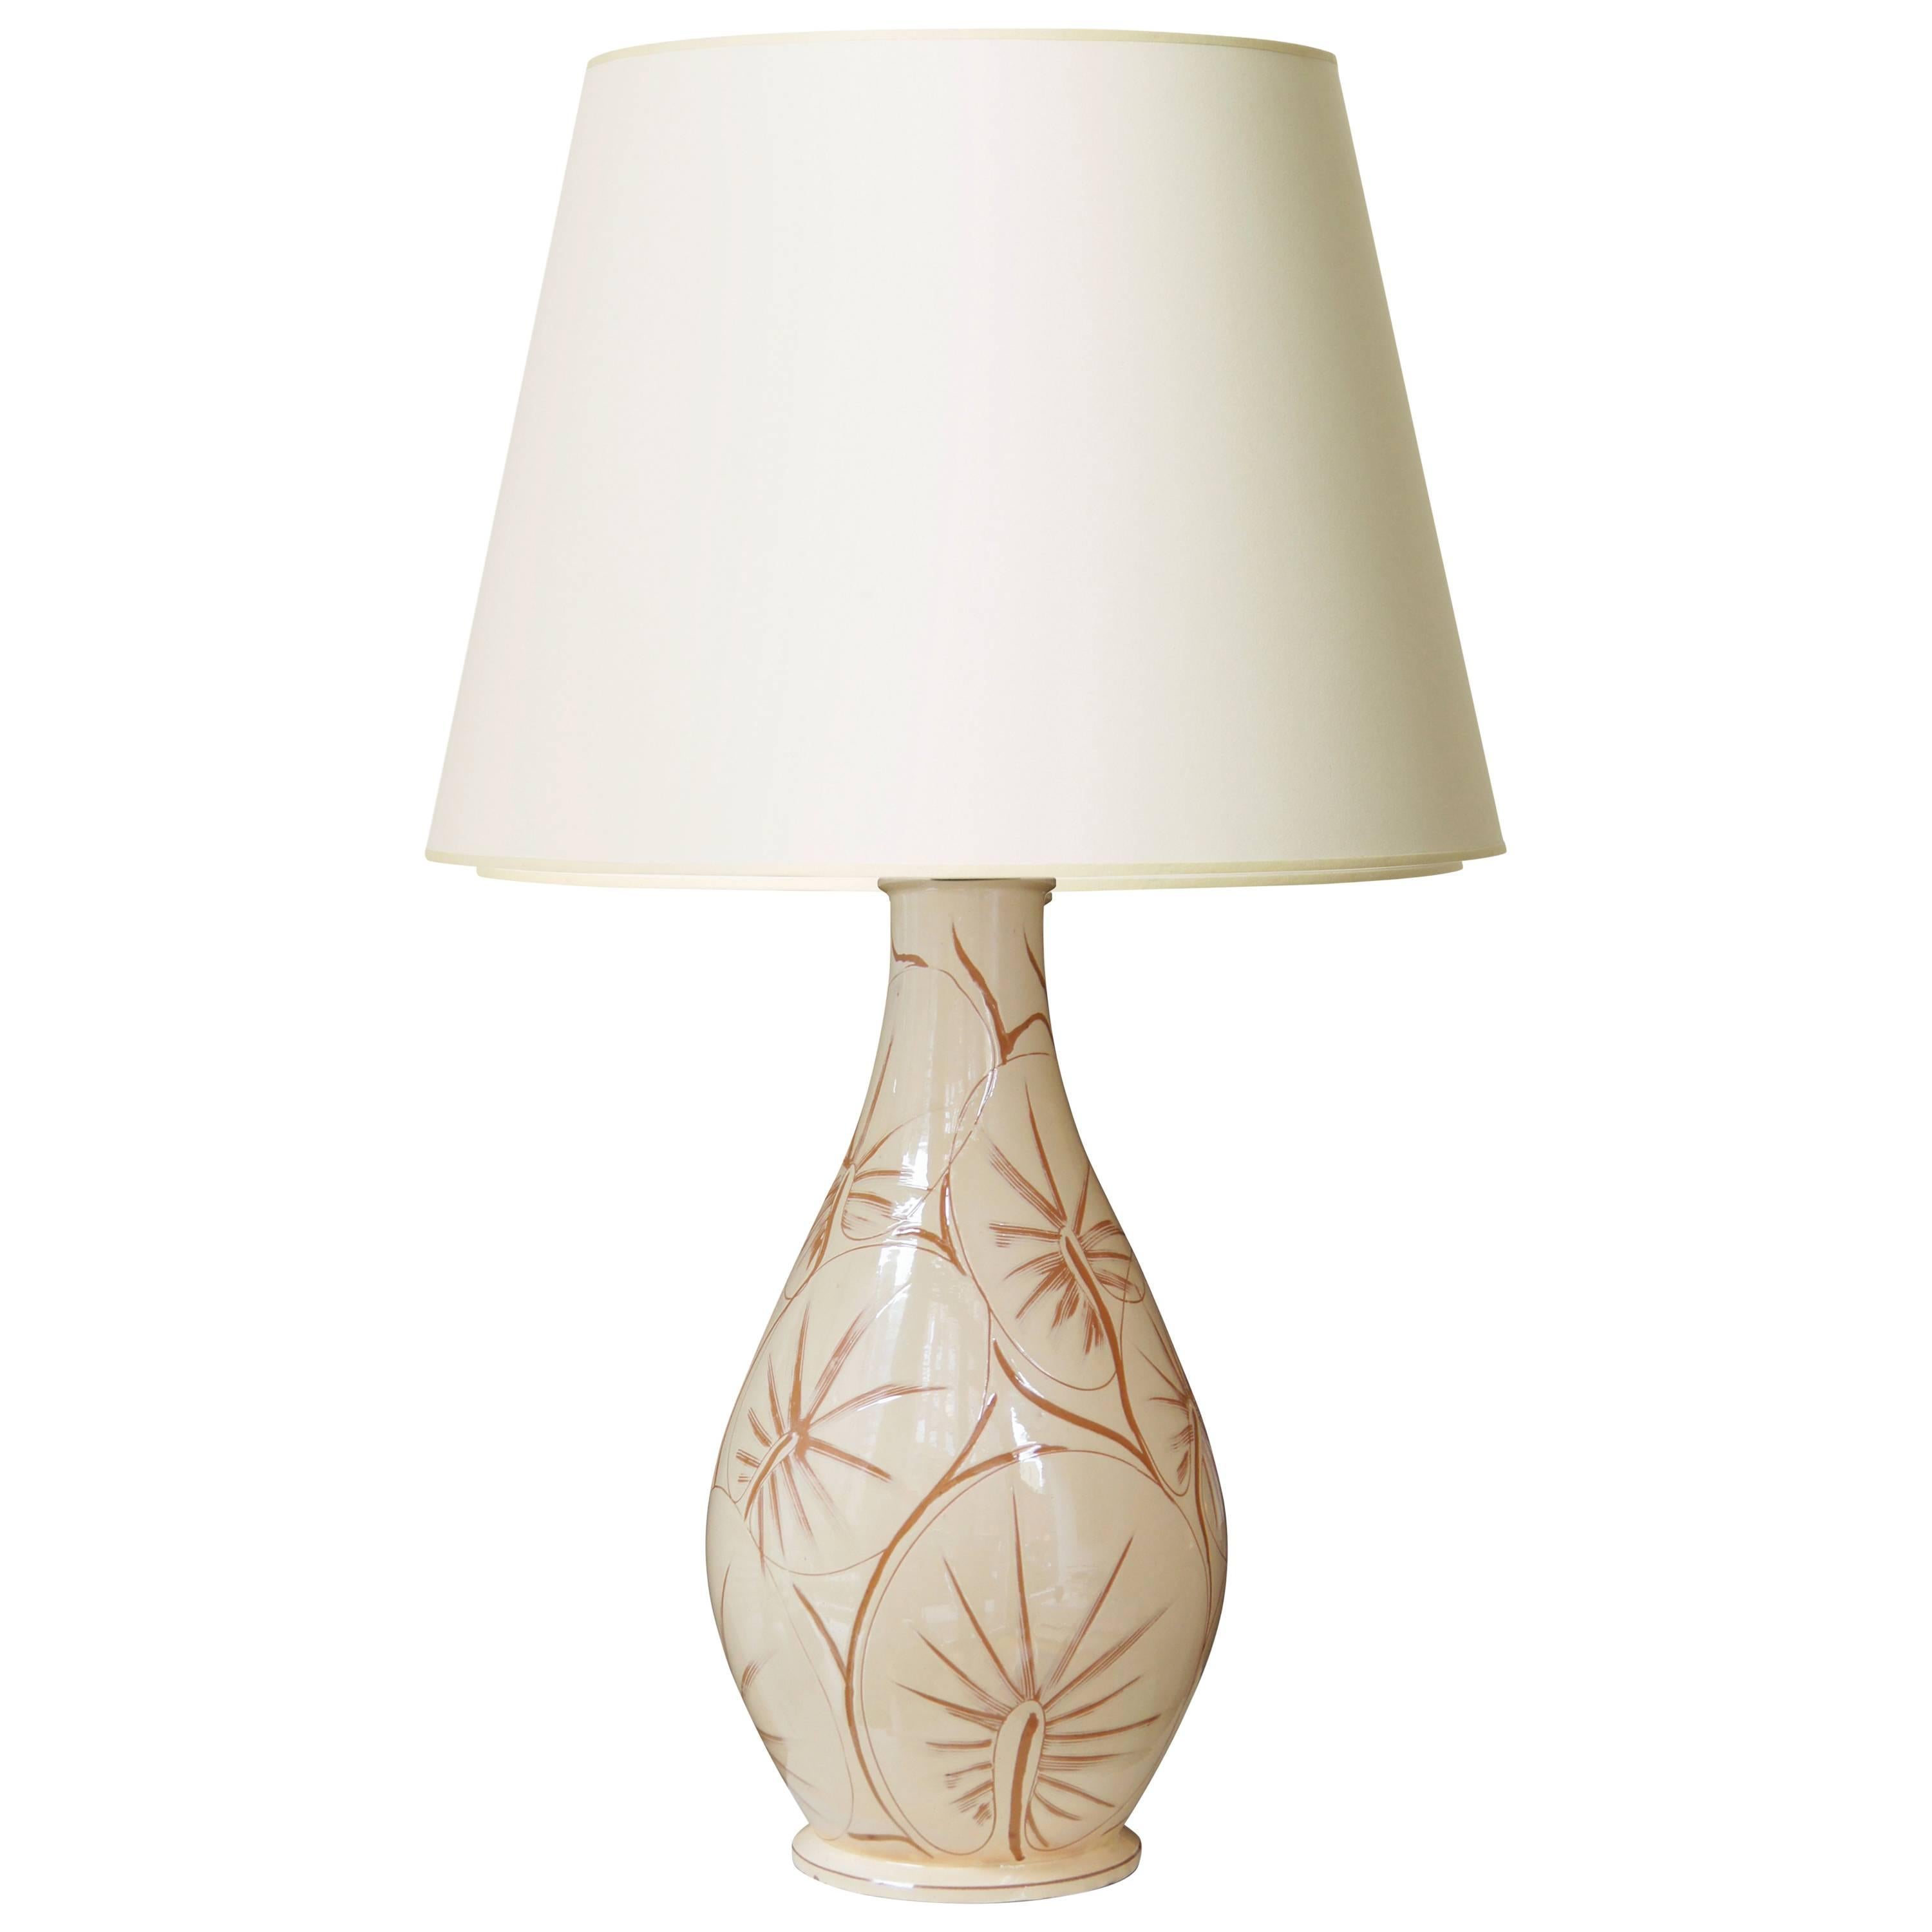 Monumental Table Lamp with Leaf Pattern Sgraffito on Ivory Glaze by Kähler For Sale